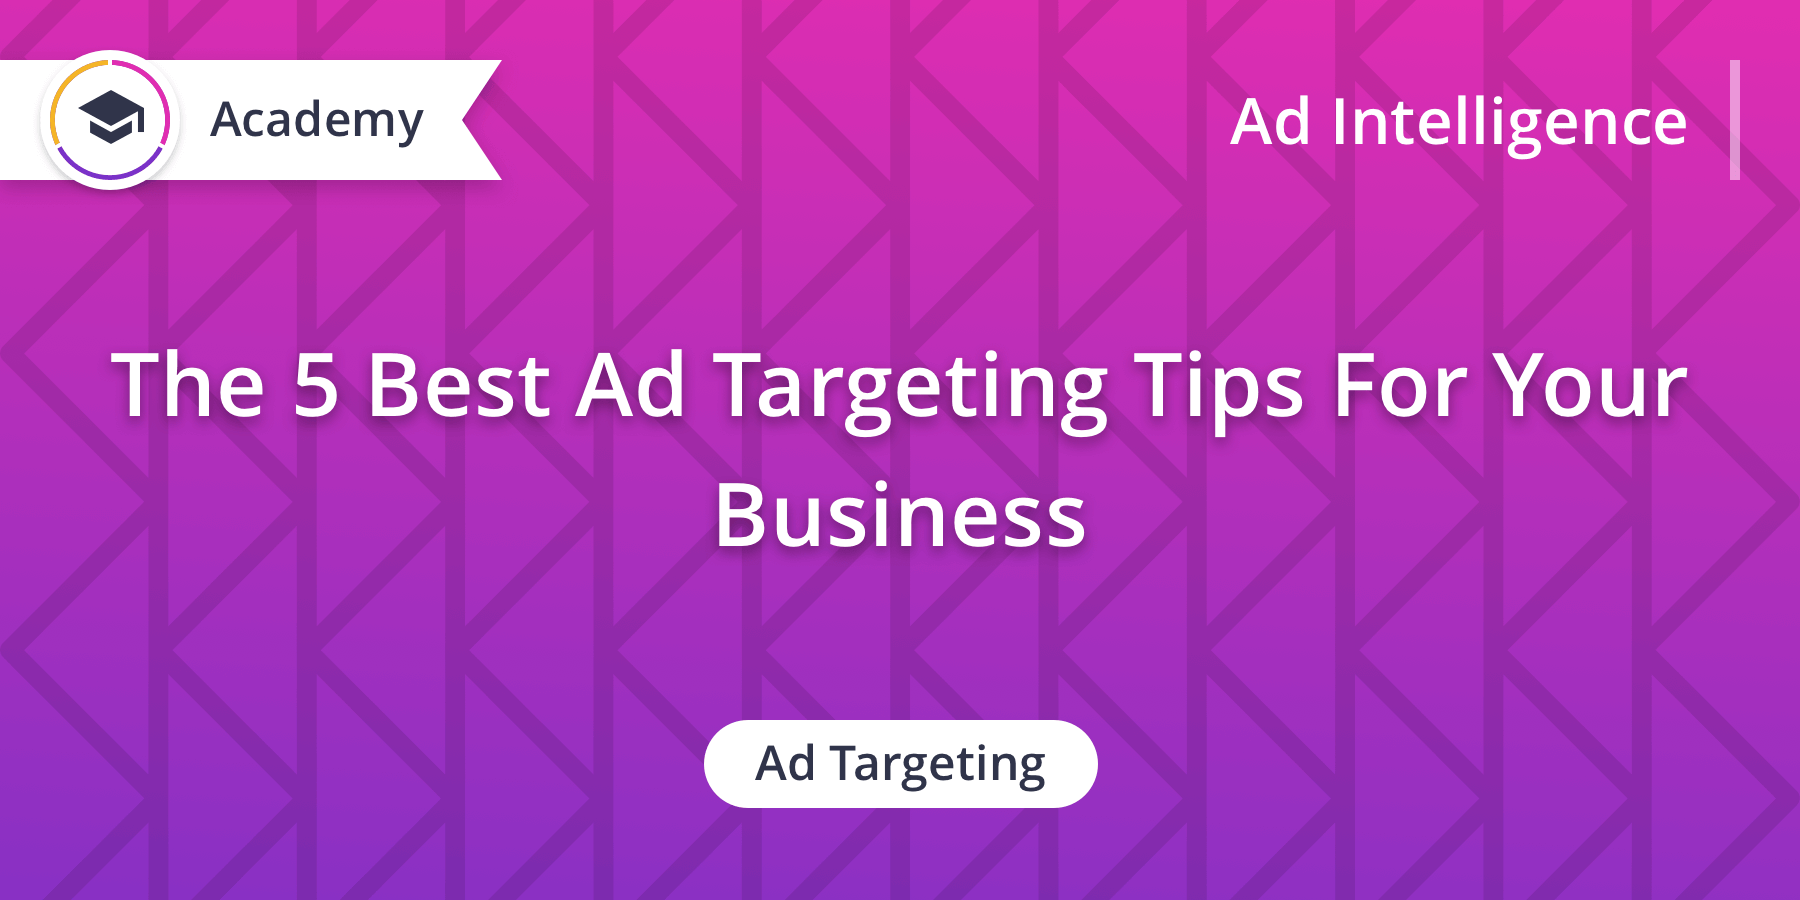 The 5 Best Mobile Ad Targeting Tips For Your Business